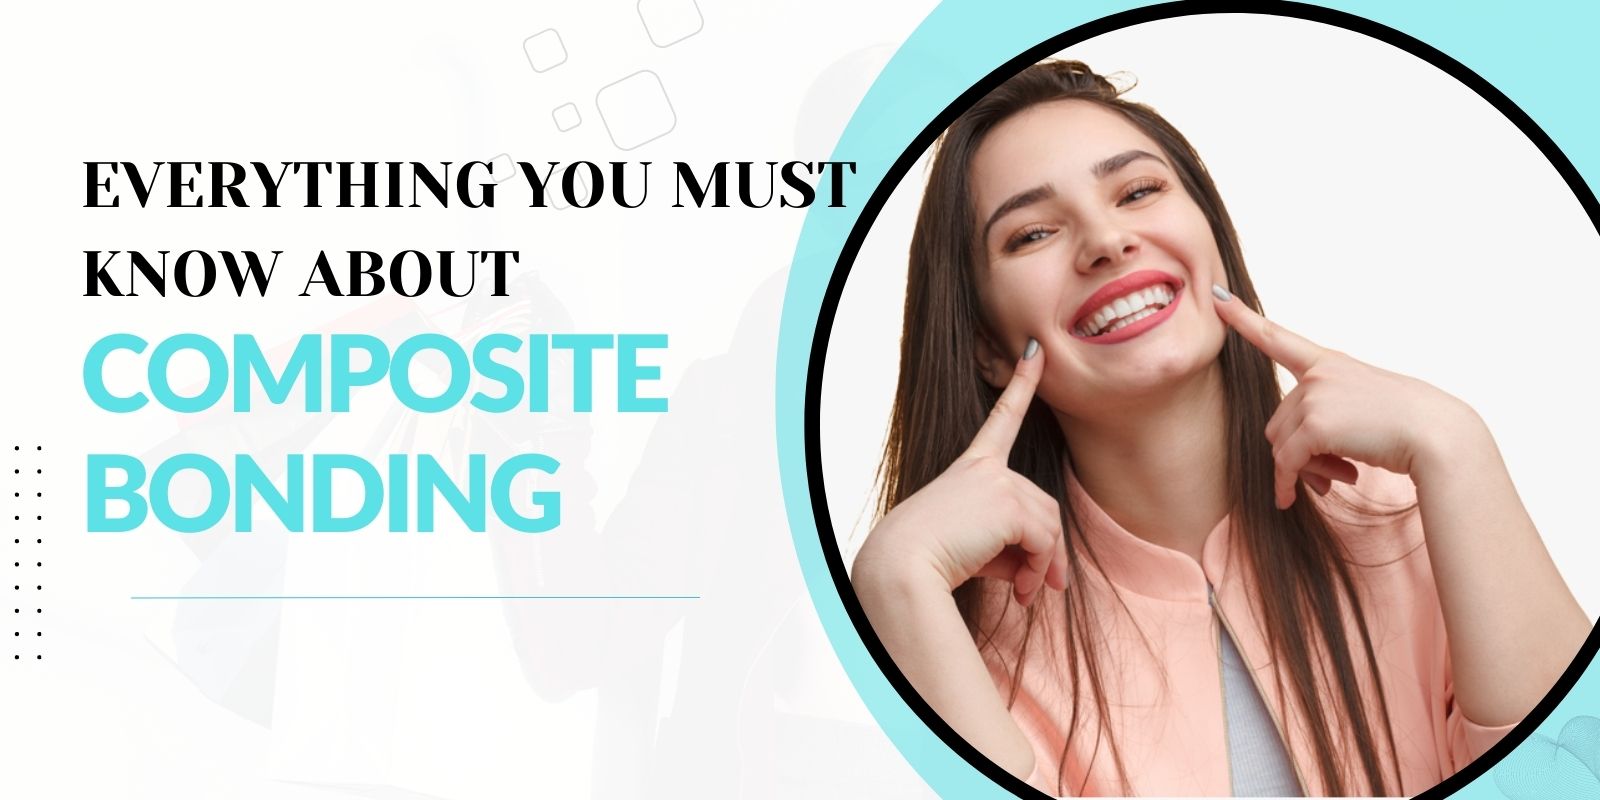 Everything you must know about composite bonding for your teeth